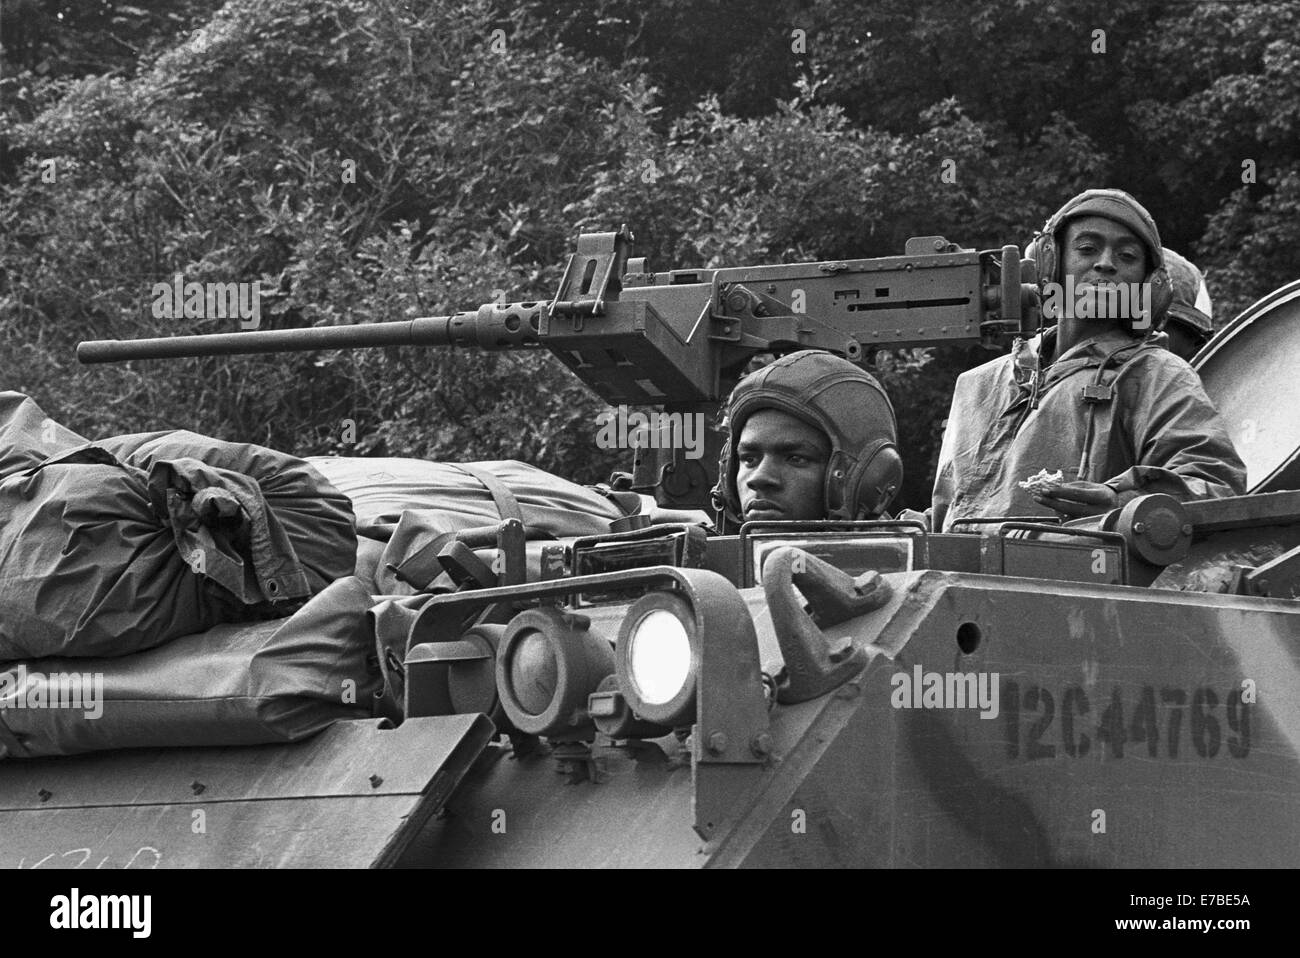 NATO exercises in the Netherlands, column of U.S. Army armored vehicles cross a village (October 1983) Stock Photo